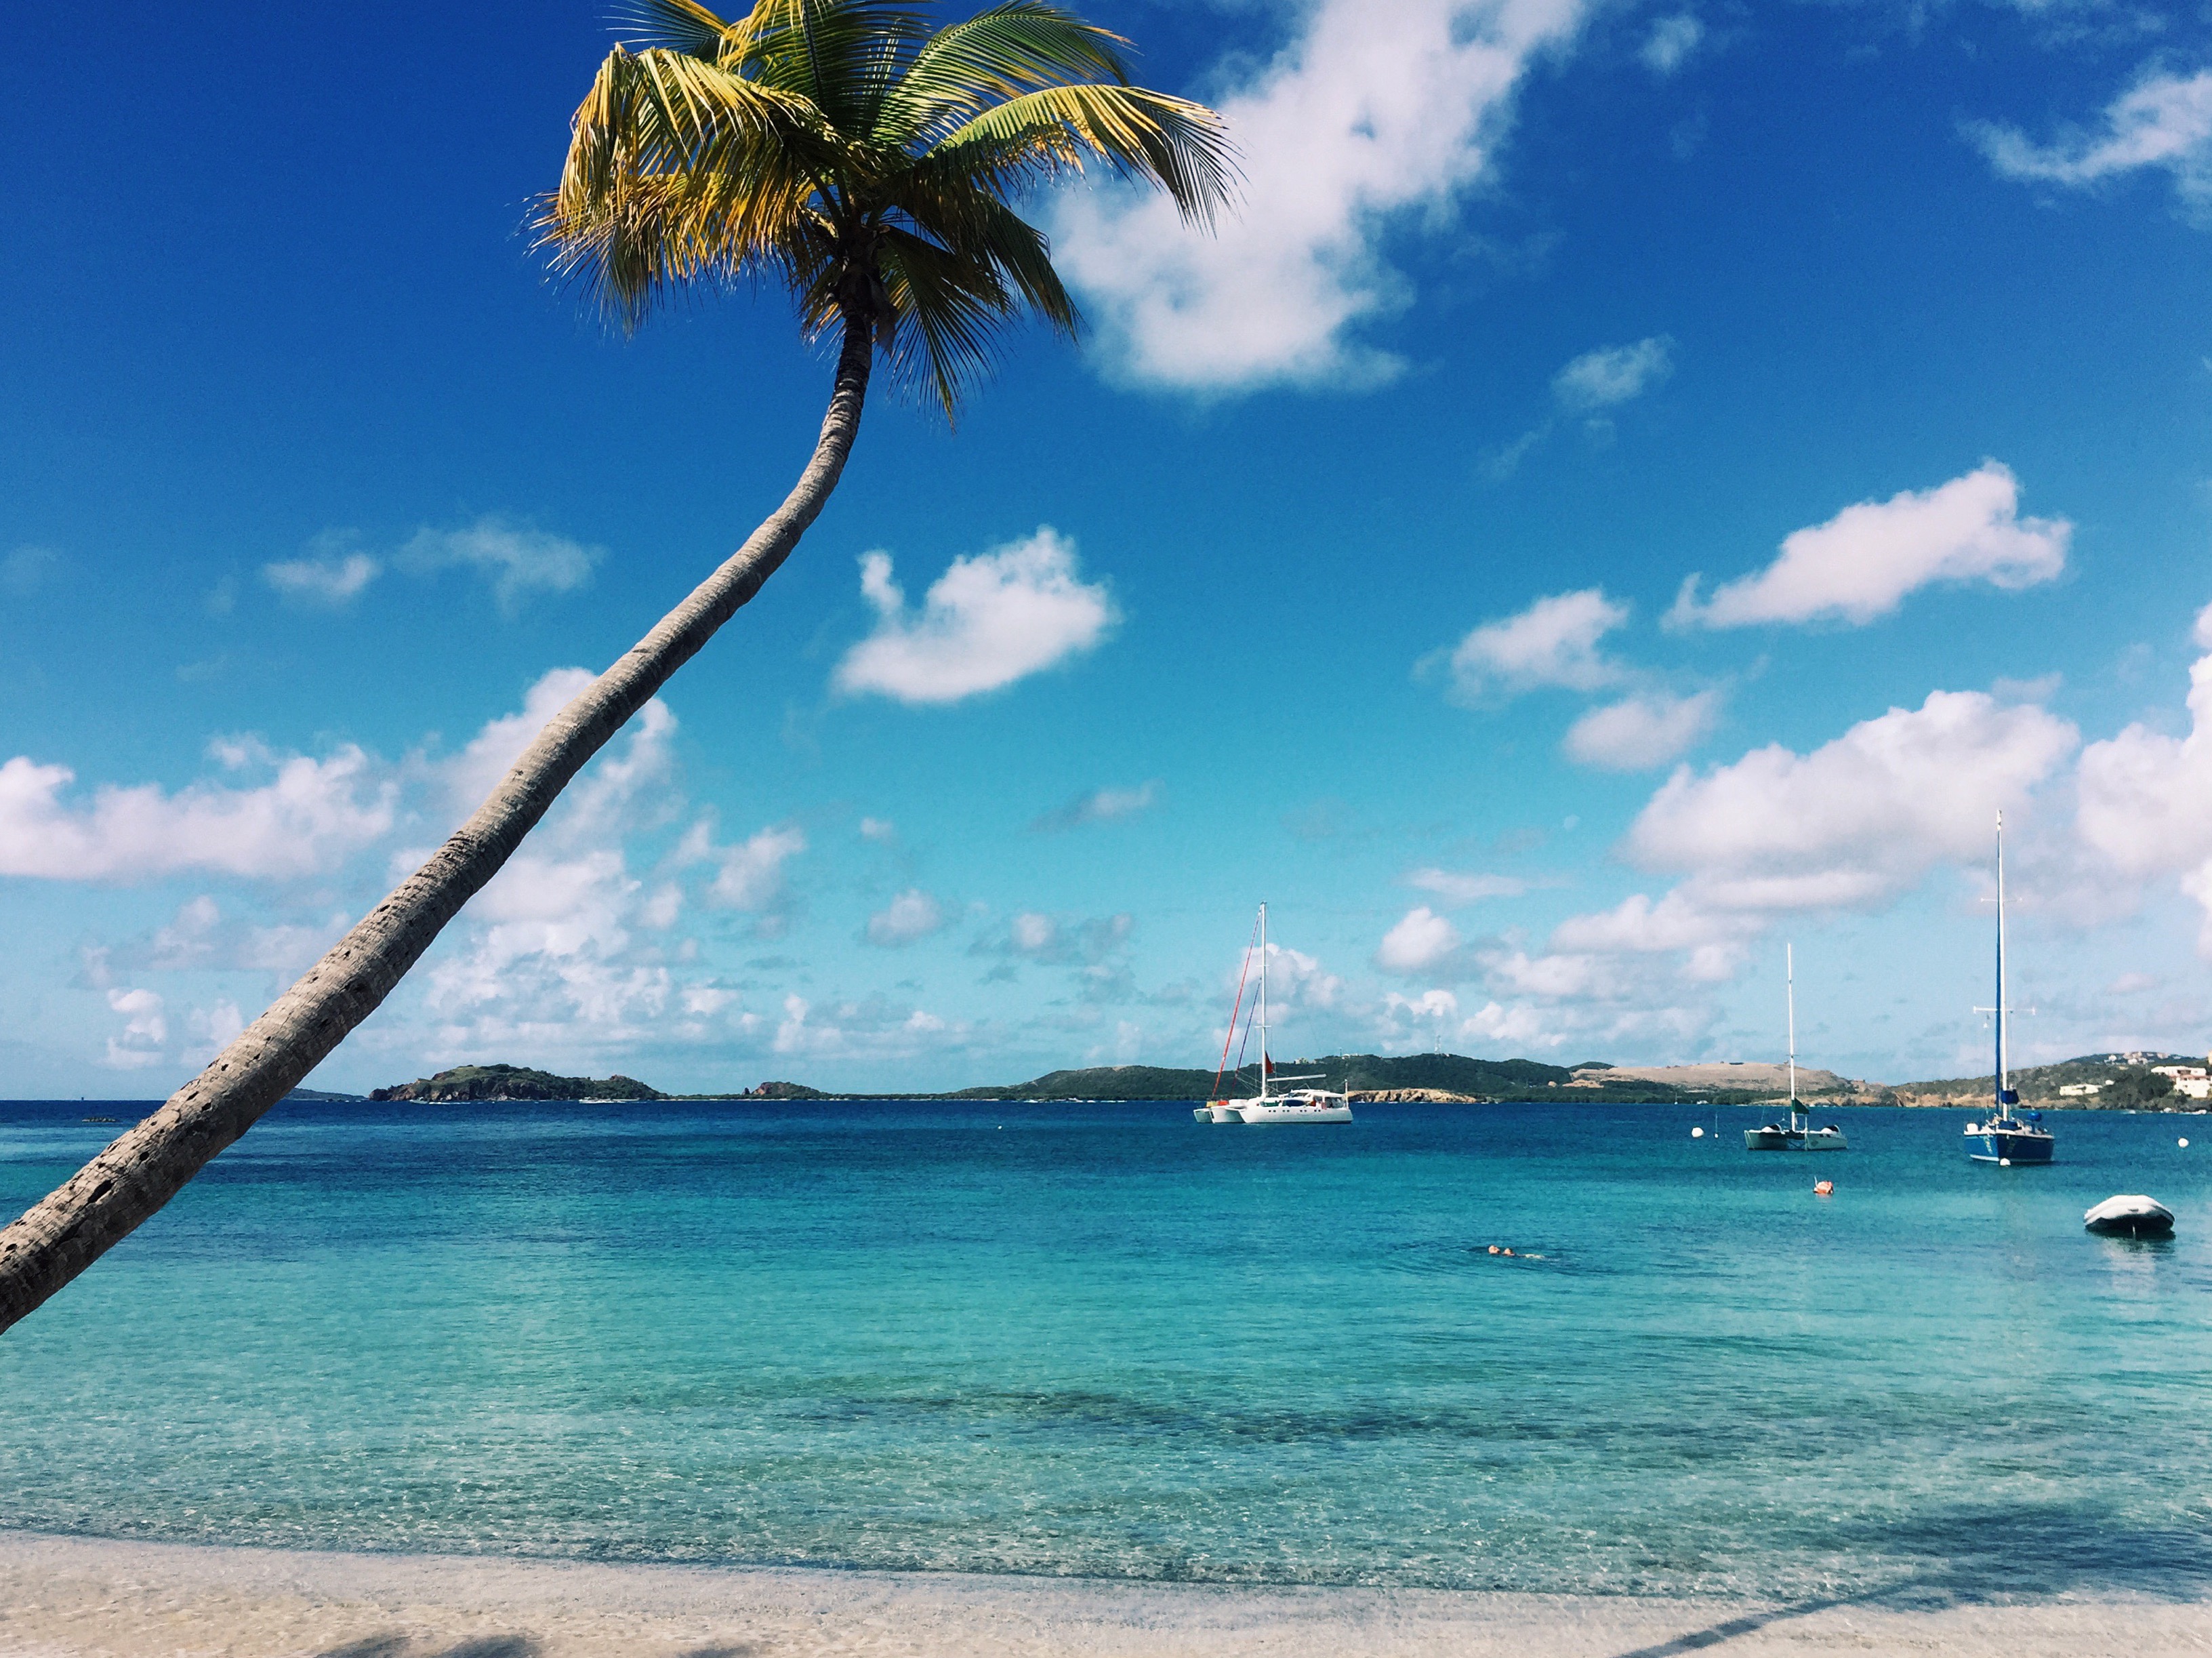 St. Thomas is the perfect place to go if your goal is eat, sleep, sunbathe, repeat before returning to work Monday morning.